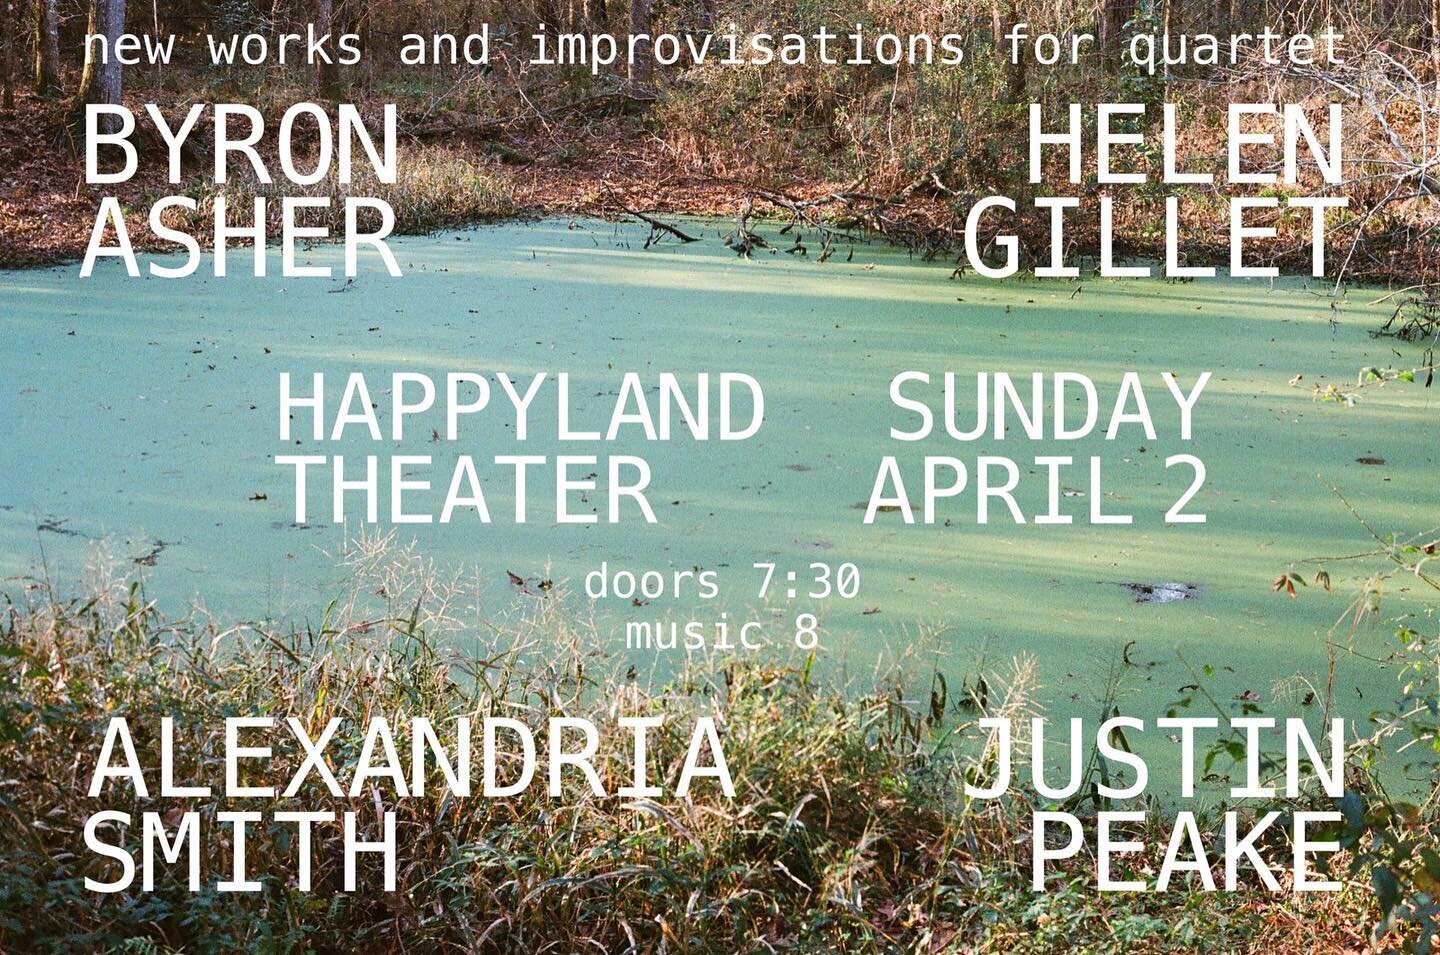 Super excited about this show. The band is sounding really good. Check out @boasher @helengillet @_justinpeake_  and I (@alexandriahbic ) play tunes by @boasher and improvisations. 4/2 @happylandtheater. Doors at 7:30!